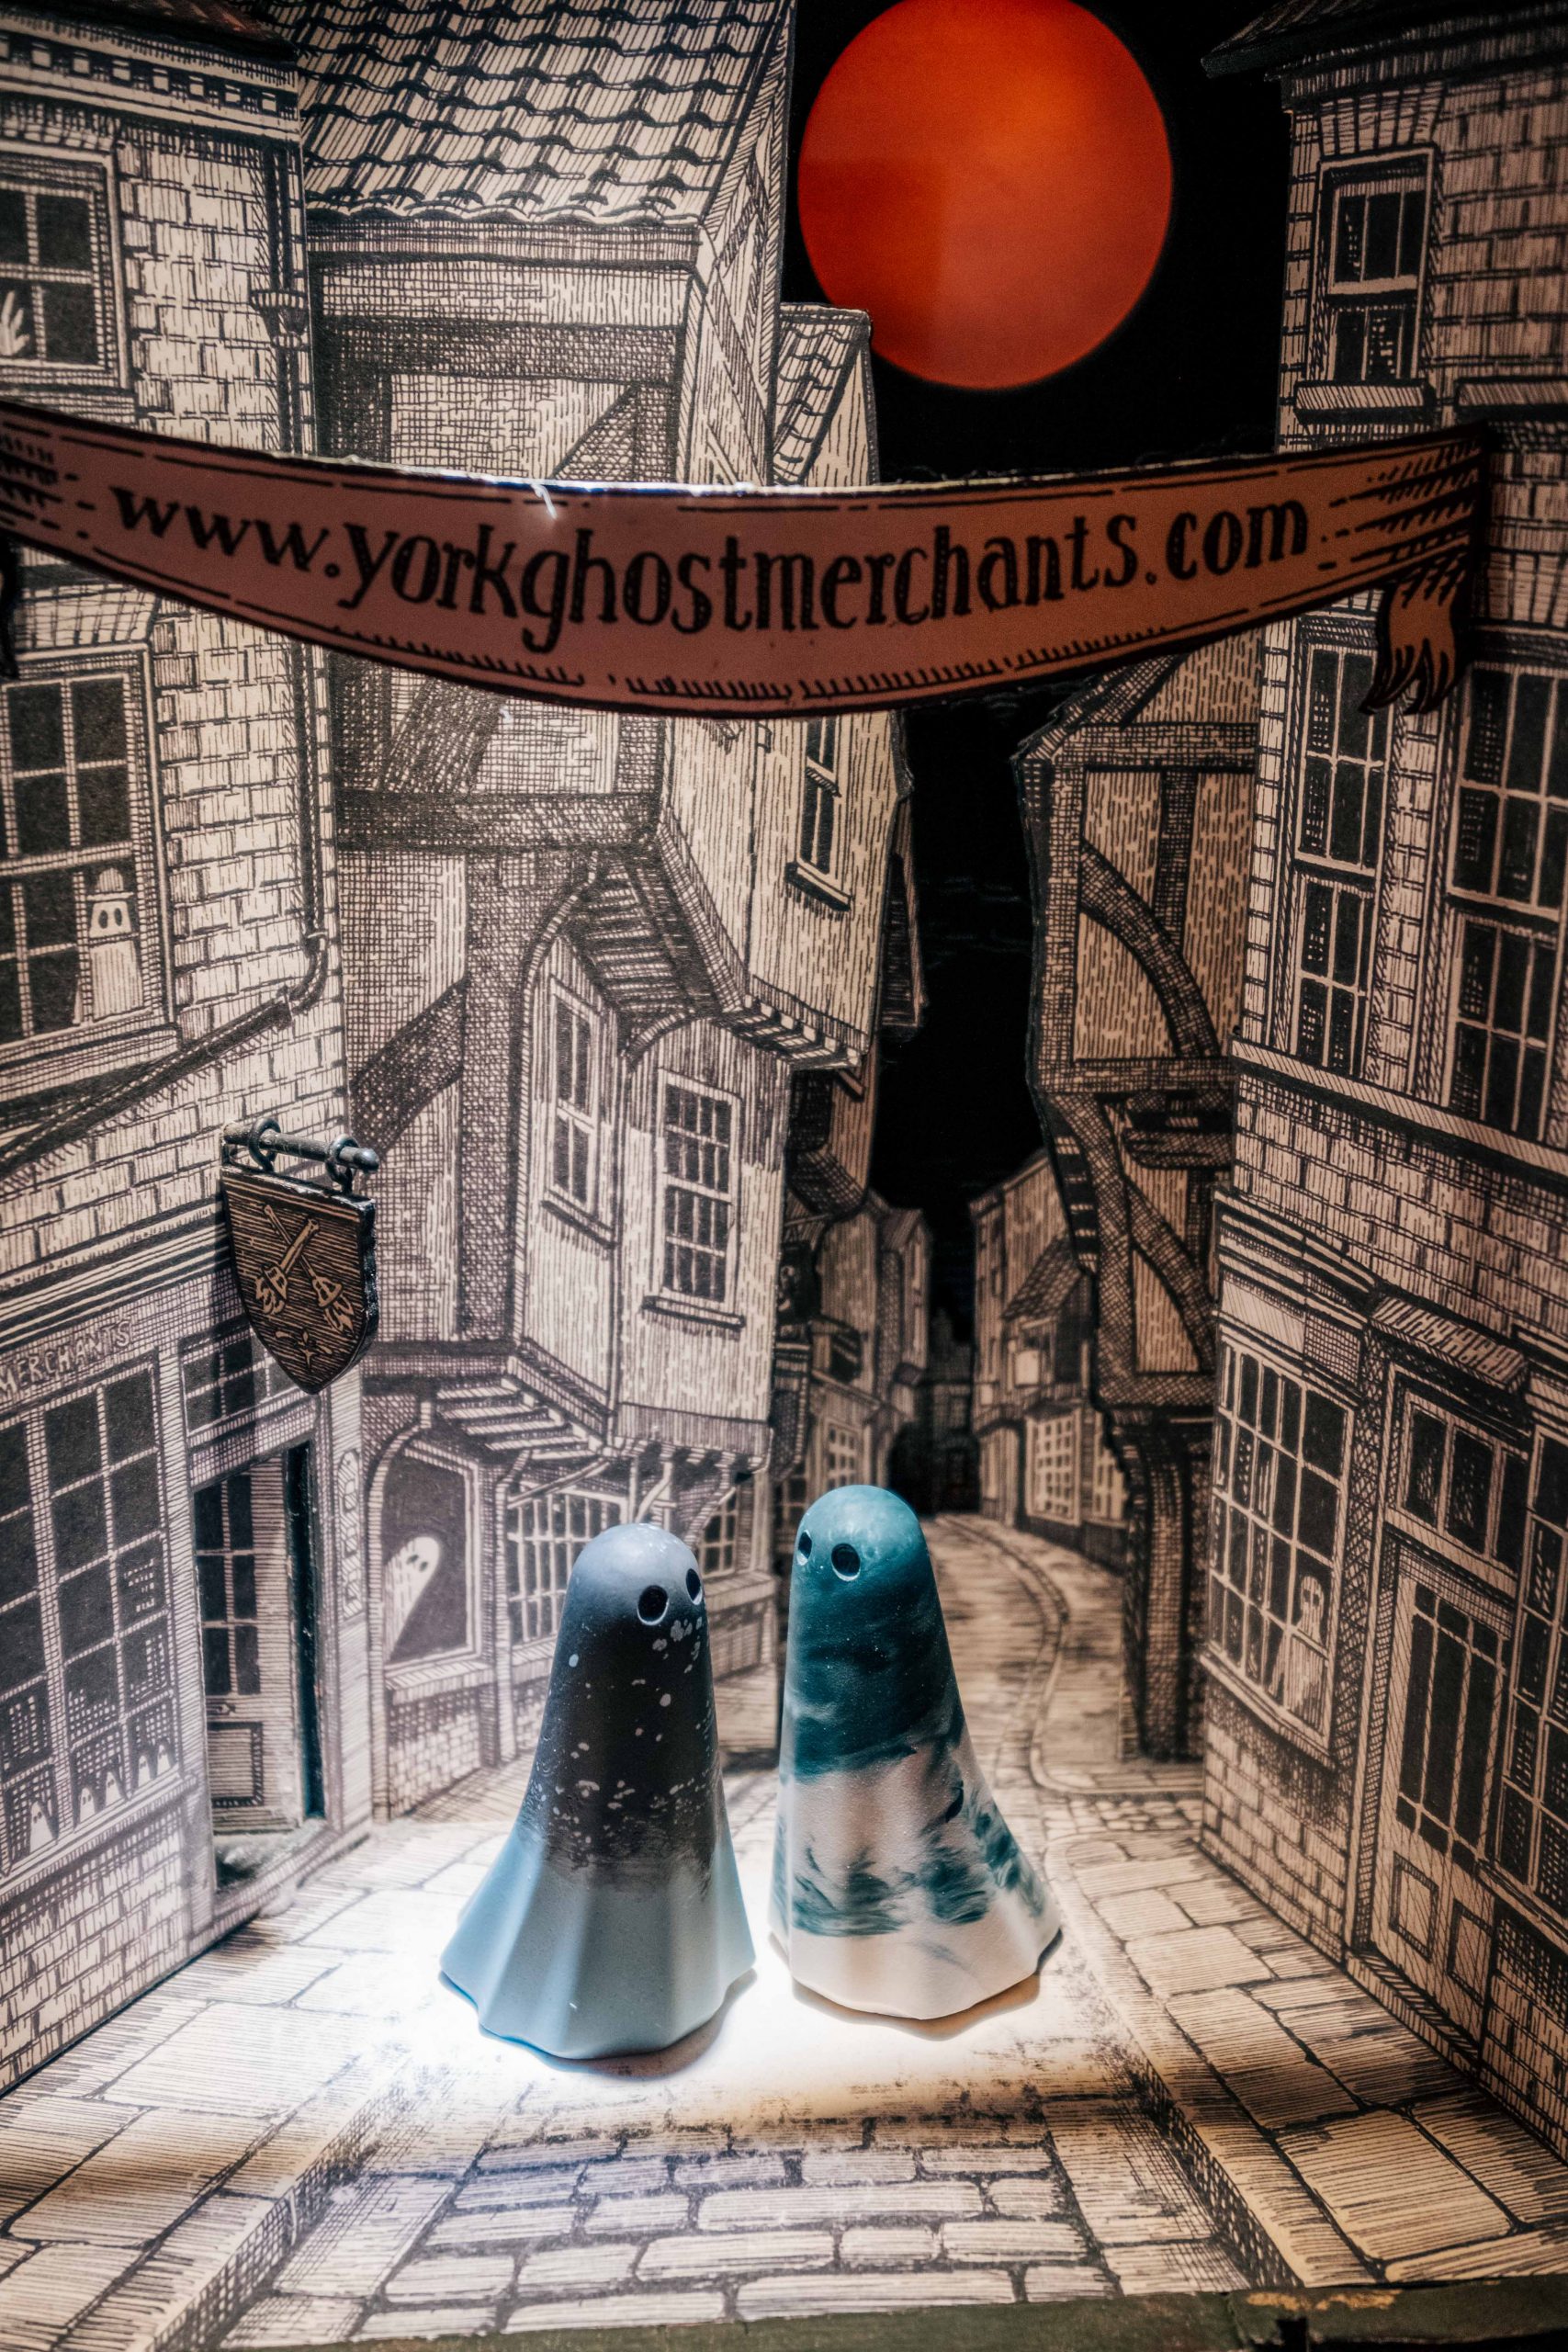 ghosts at the unique merchant shop in york